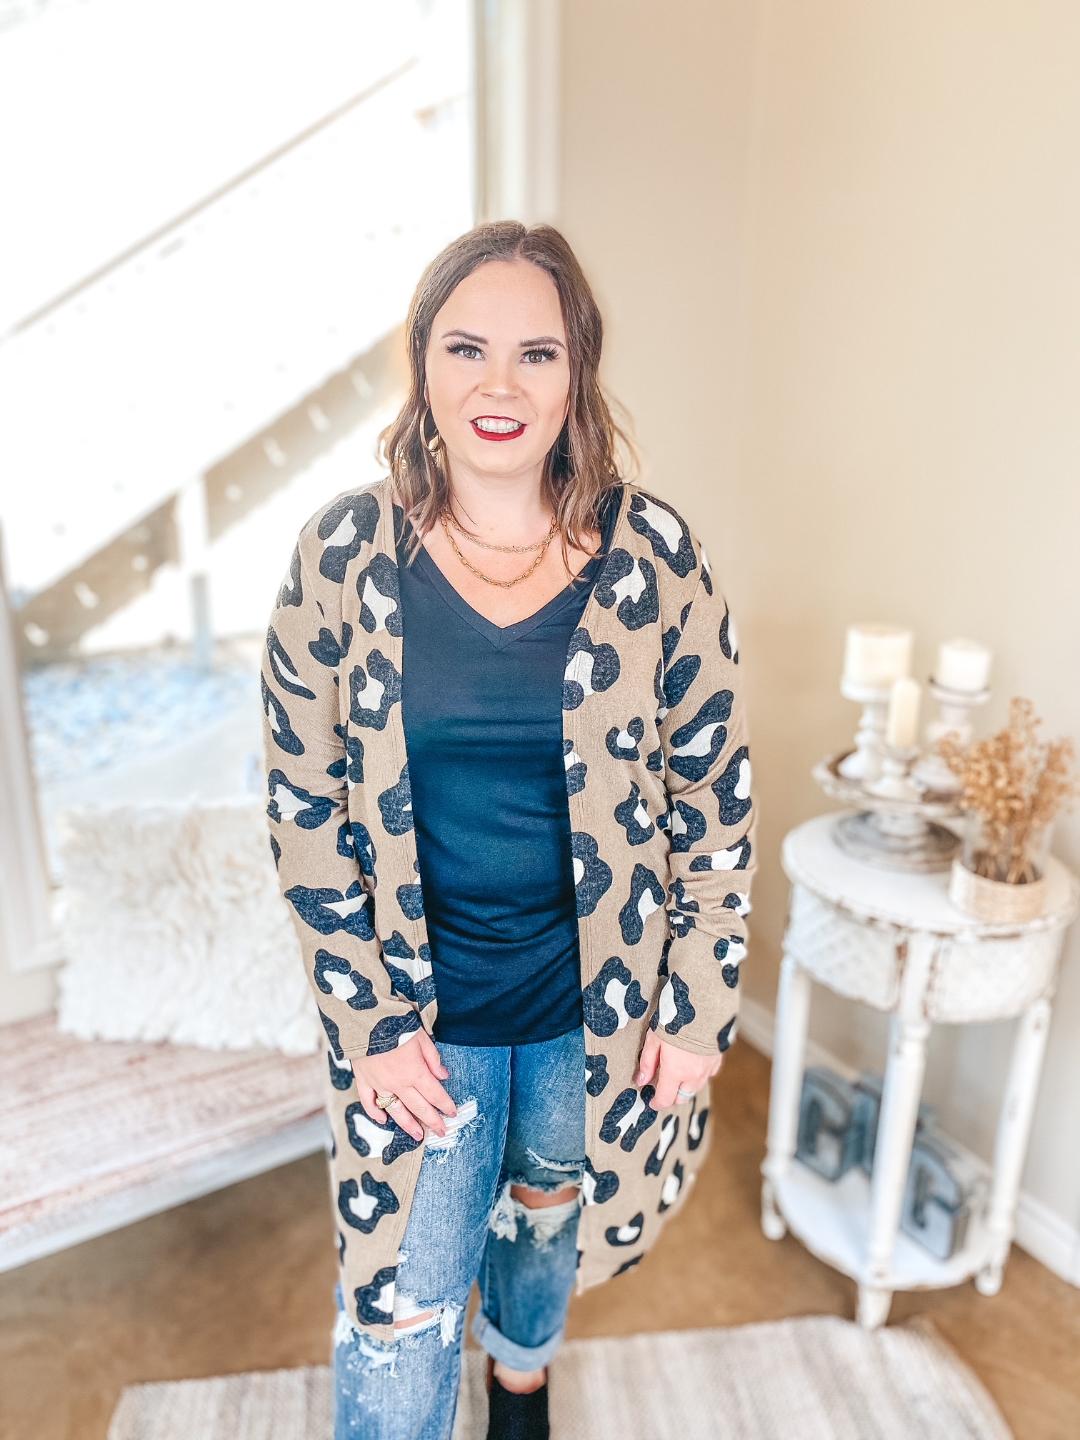 Keeping The Pace Large Leopard Print Cardigan in Taupe - Giddy Up Glamour Boutique